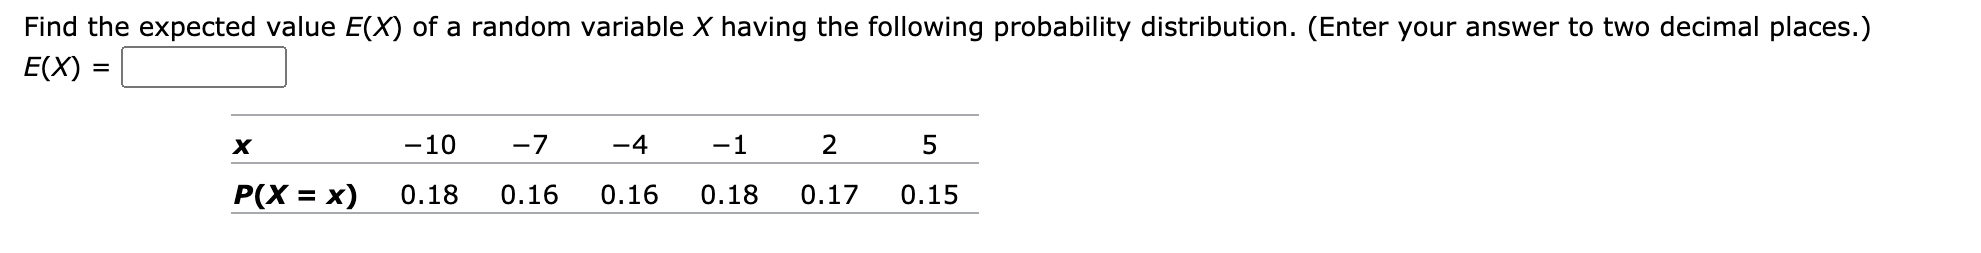 Find the expected value E(X) of a random variable X having the following probability distribution. (Enter your answer to two decimal places.)
E(X)
-10
-7
-4
-1
2
5
P(X = x)
0.18
0.16
0.16
0.18
0.17
0.15
%3D
